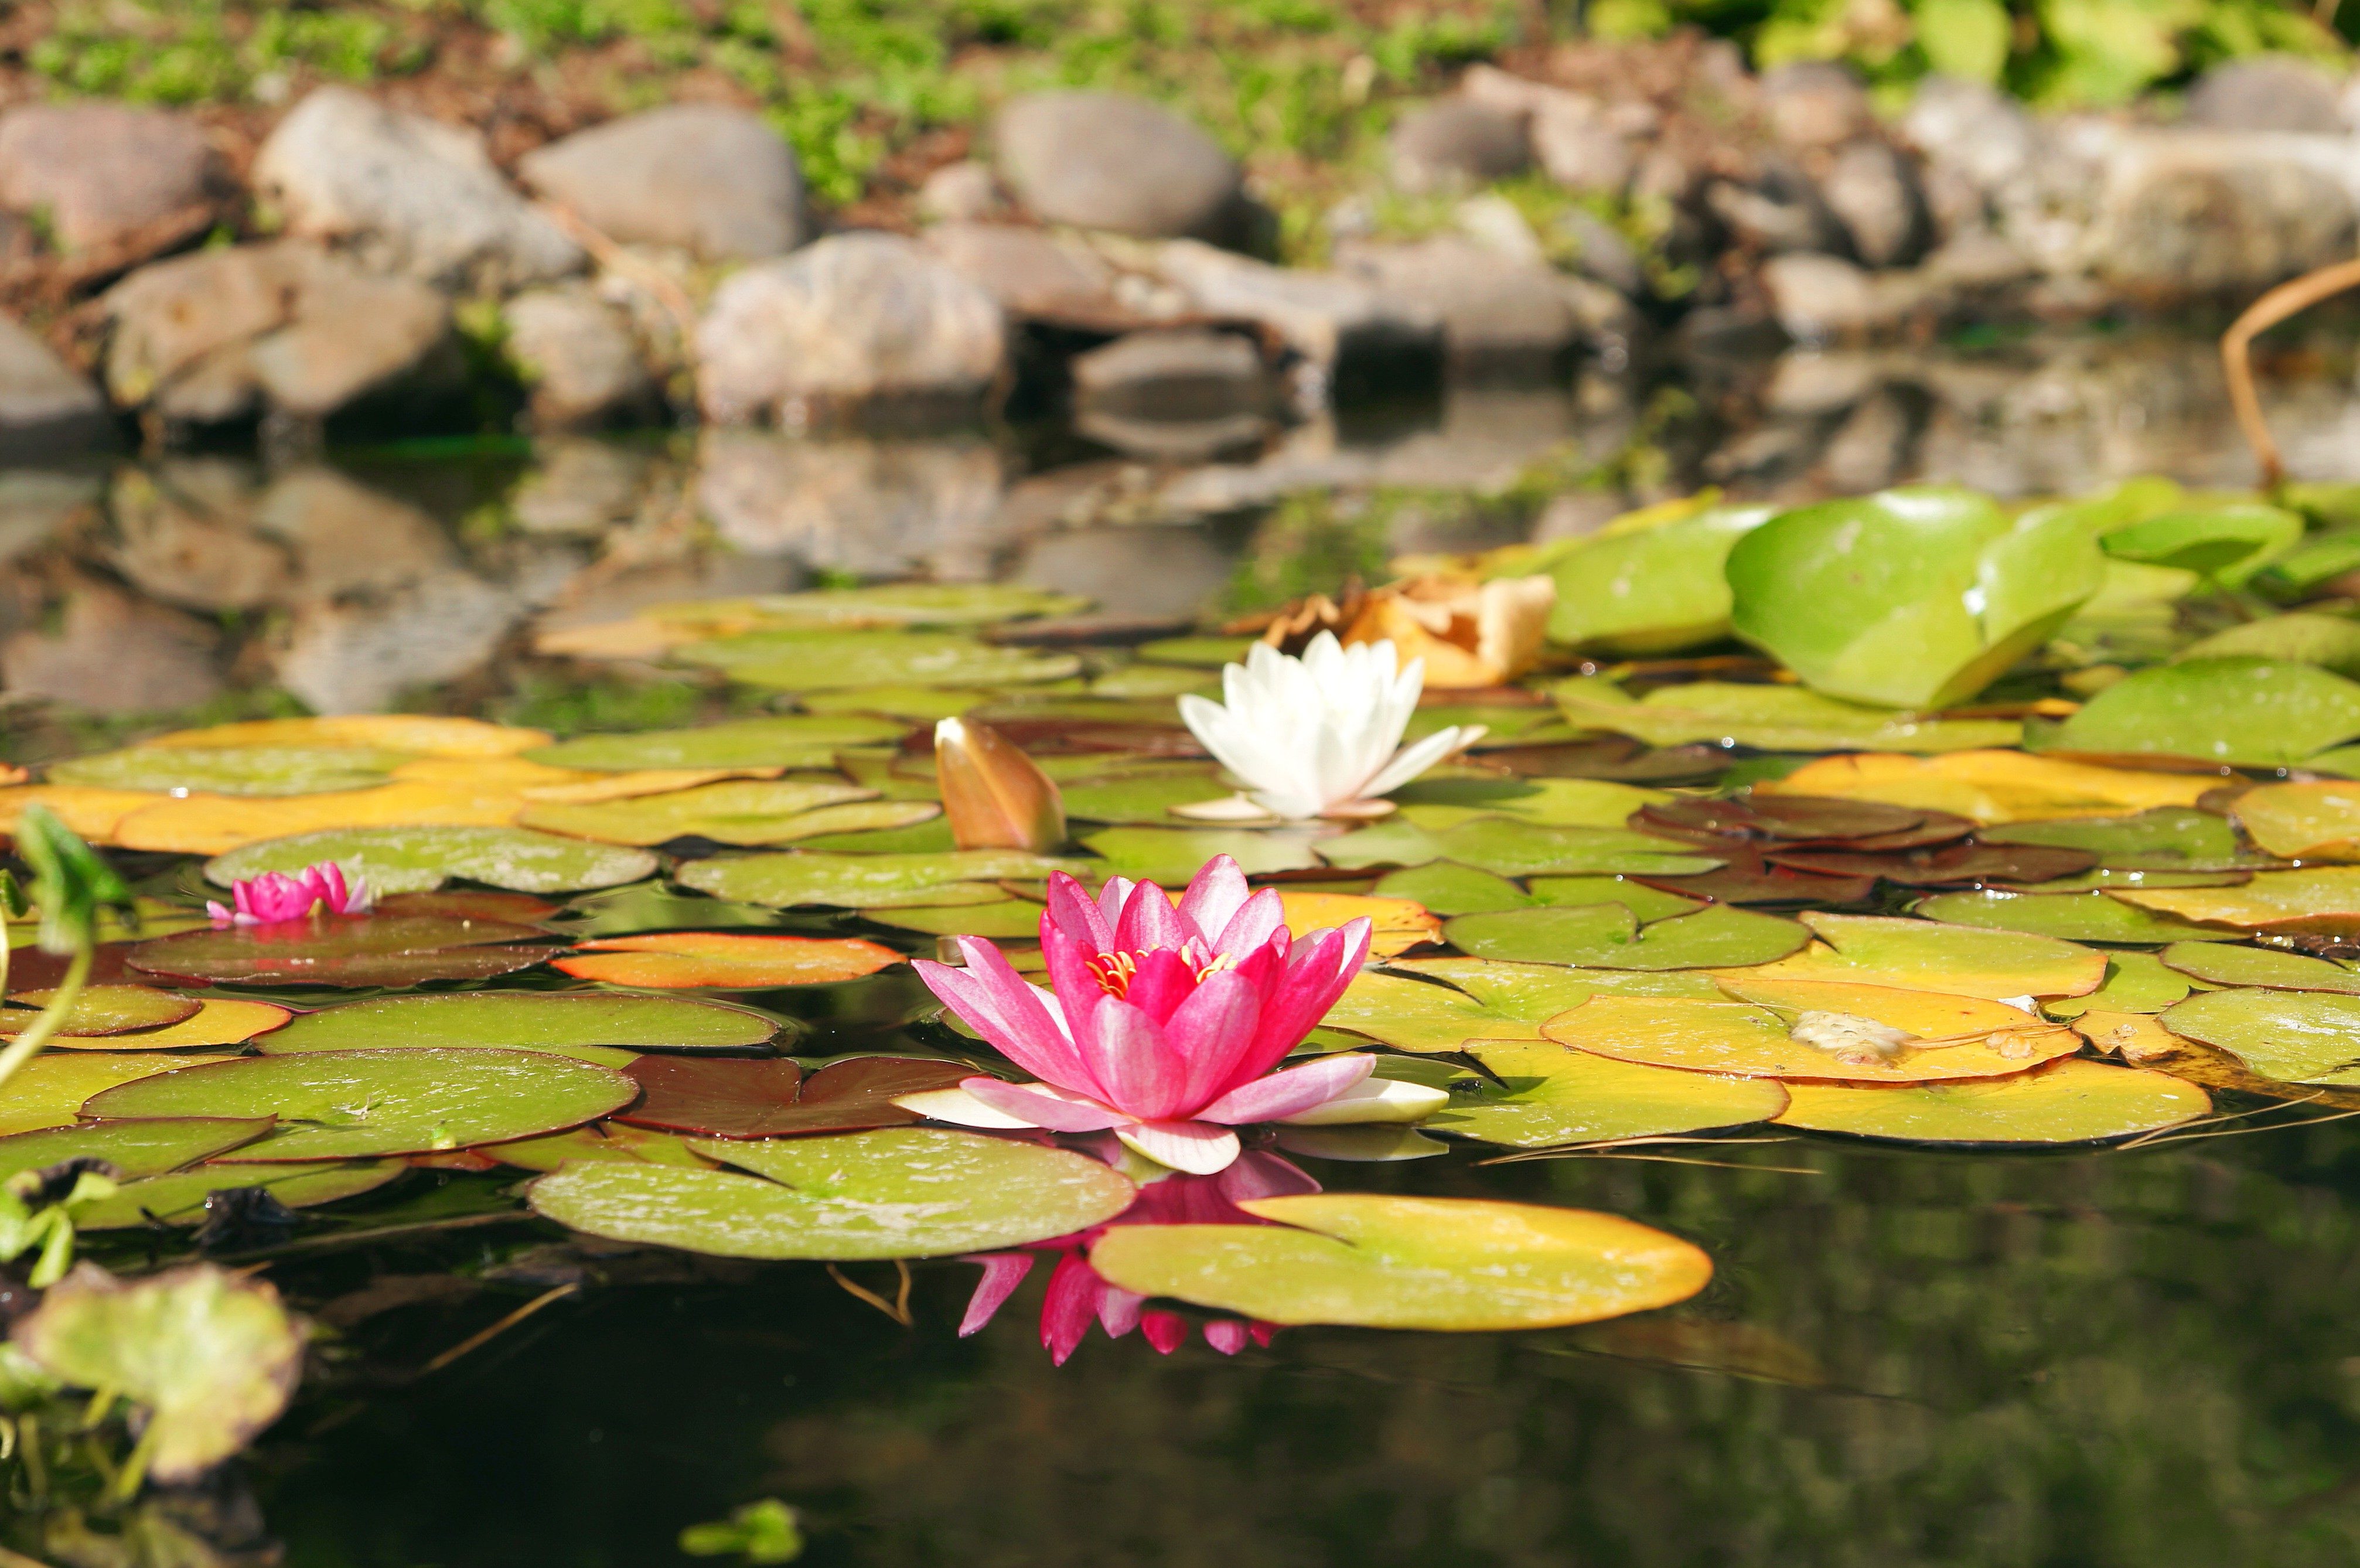 Free picture: water lily, lilies, lotus, white, pink petals, flowers ...